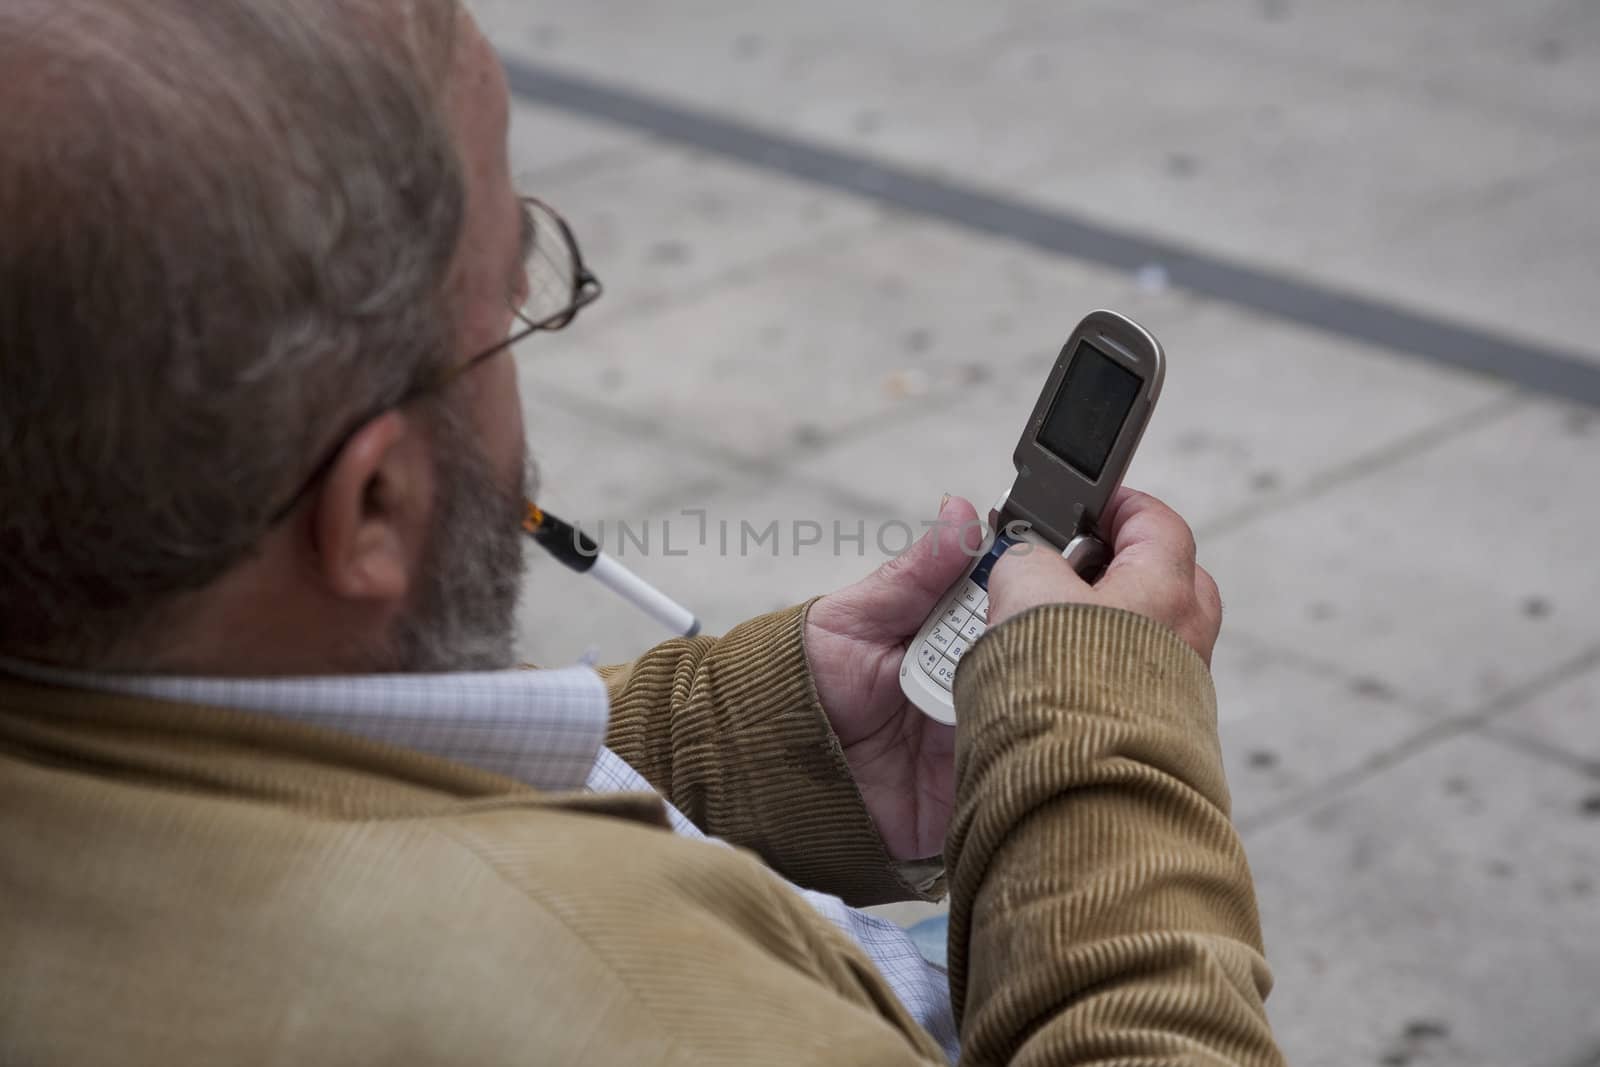 SENIOR MAN WITH MOBILE, OVIEDO, SPAIN - SEPTEMBER 17: Caucasian male with mobile phone is texting a message on a bench in city of Oviedo, Spain, on September 17, 2012.